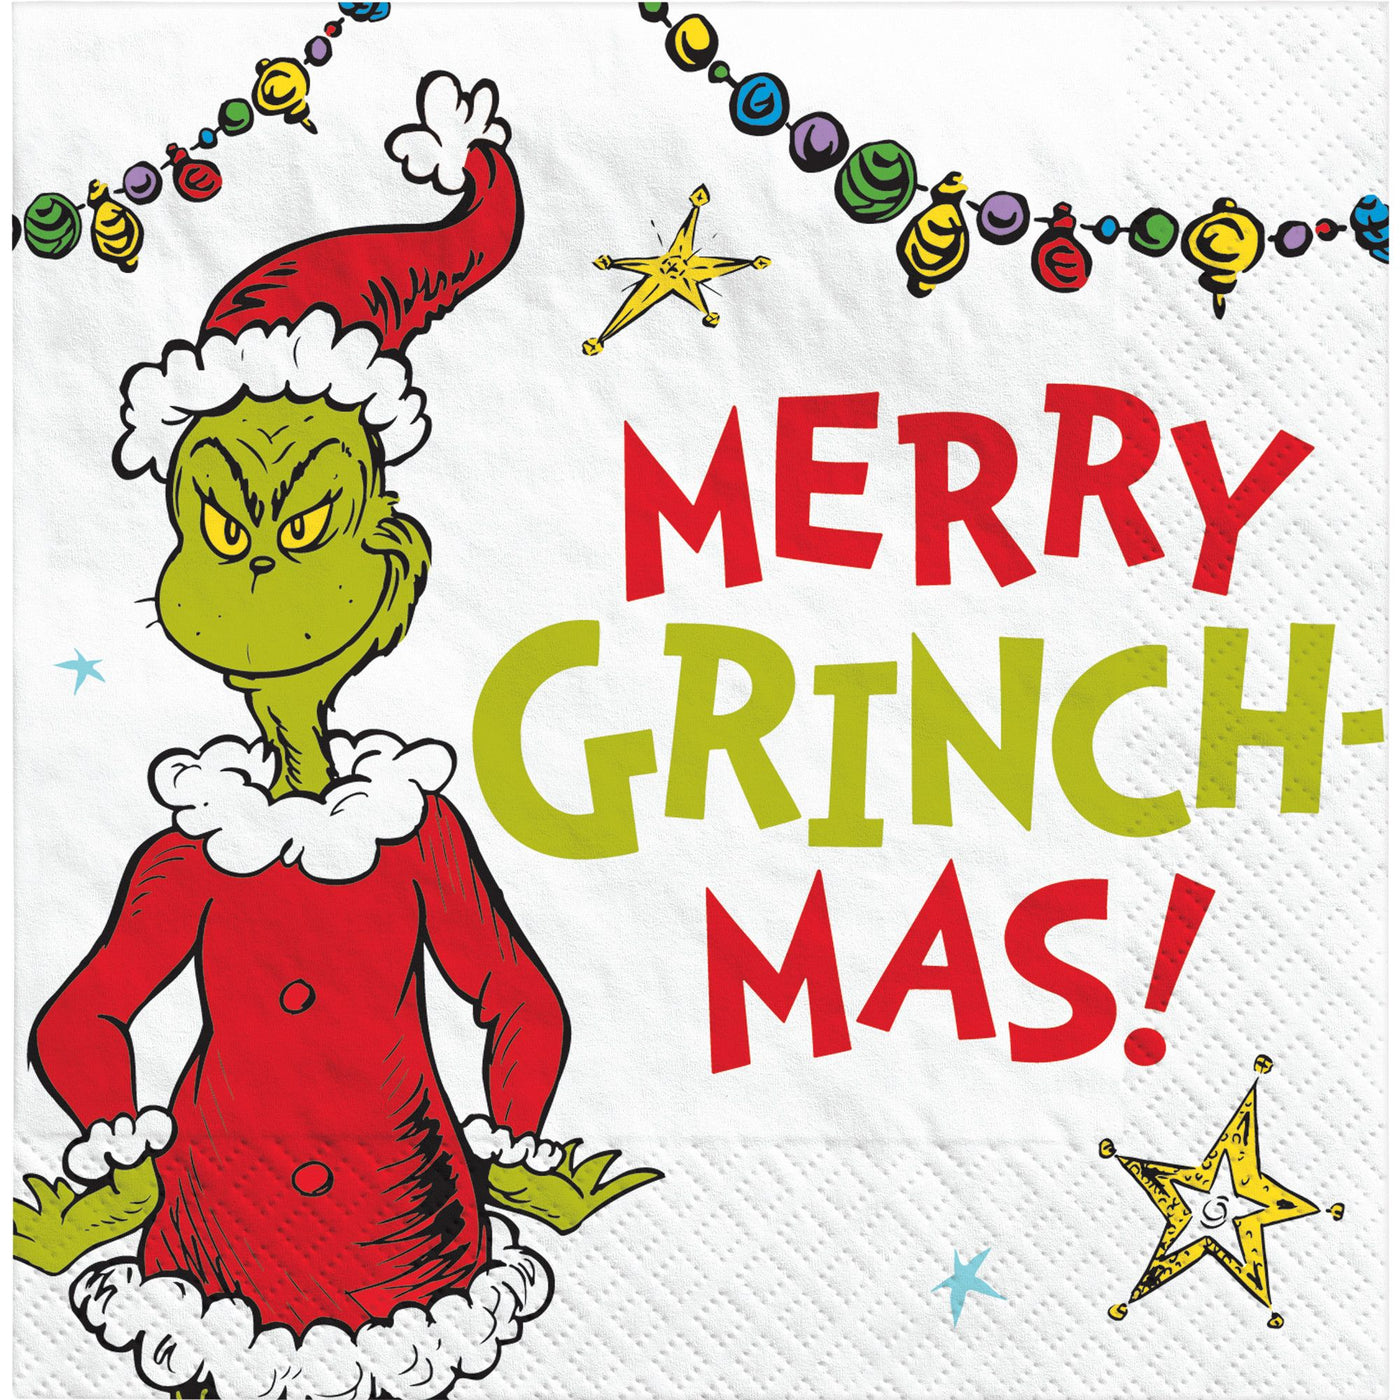 Traditional Merry Grinch-mas Napkins